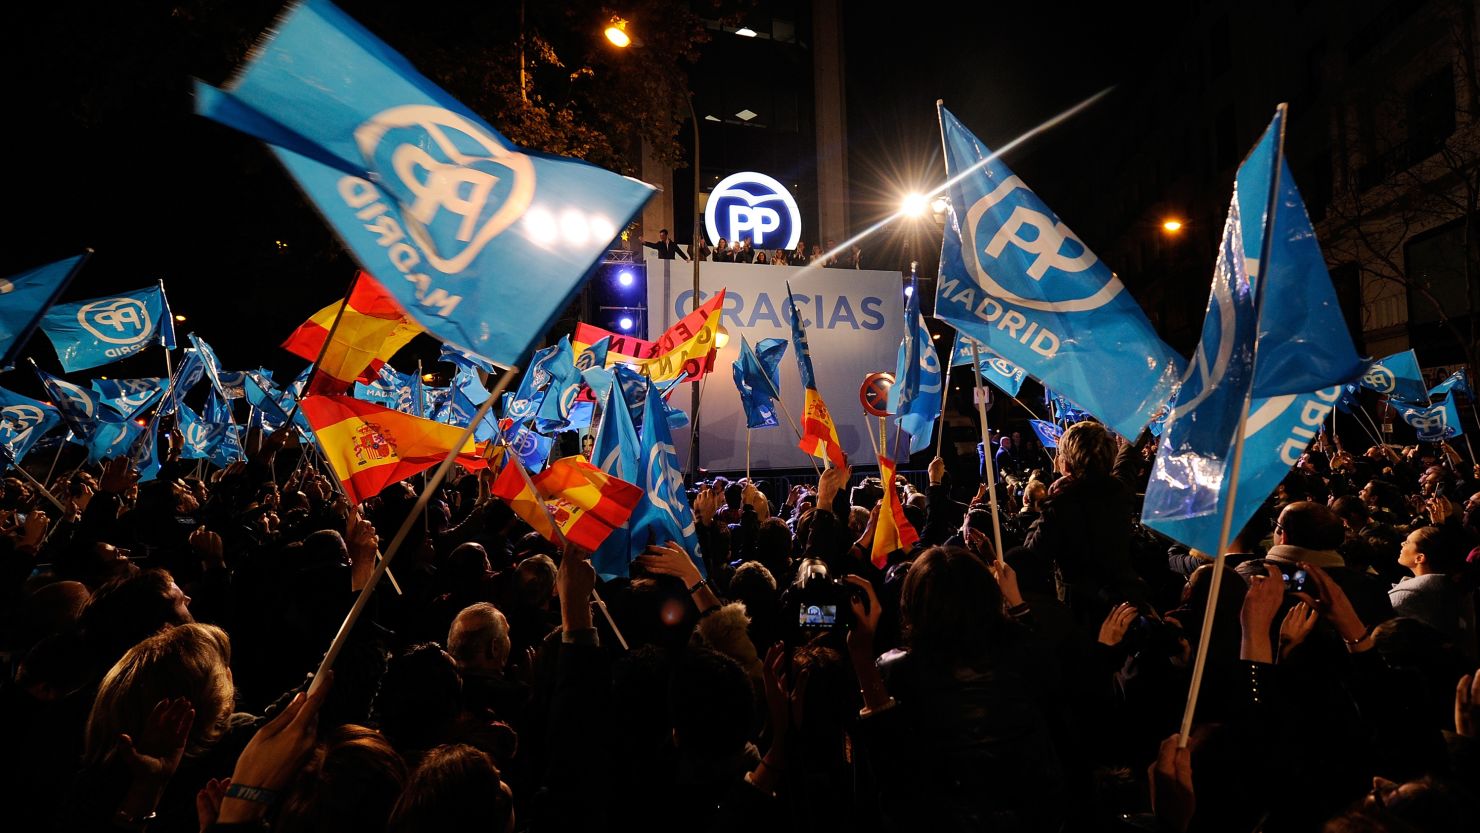 Partido Popular supporters wave to Spanish Prime Minister Mariano Rajoy on the balcony after his party won the most votes on December 20, 2015 in Madrid, Spain.